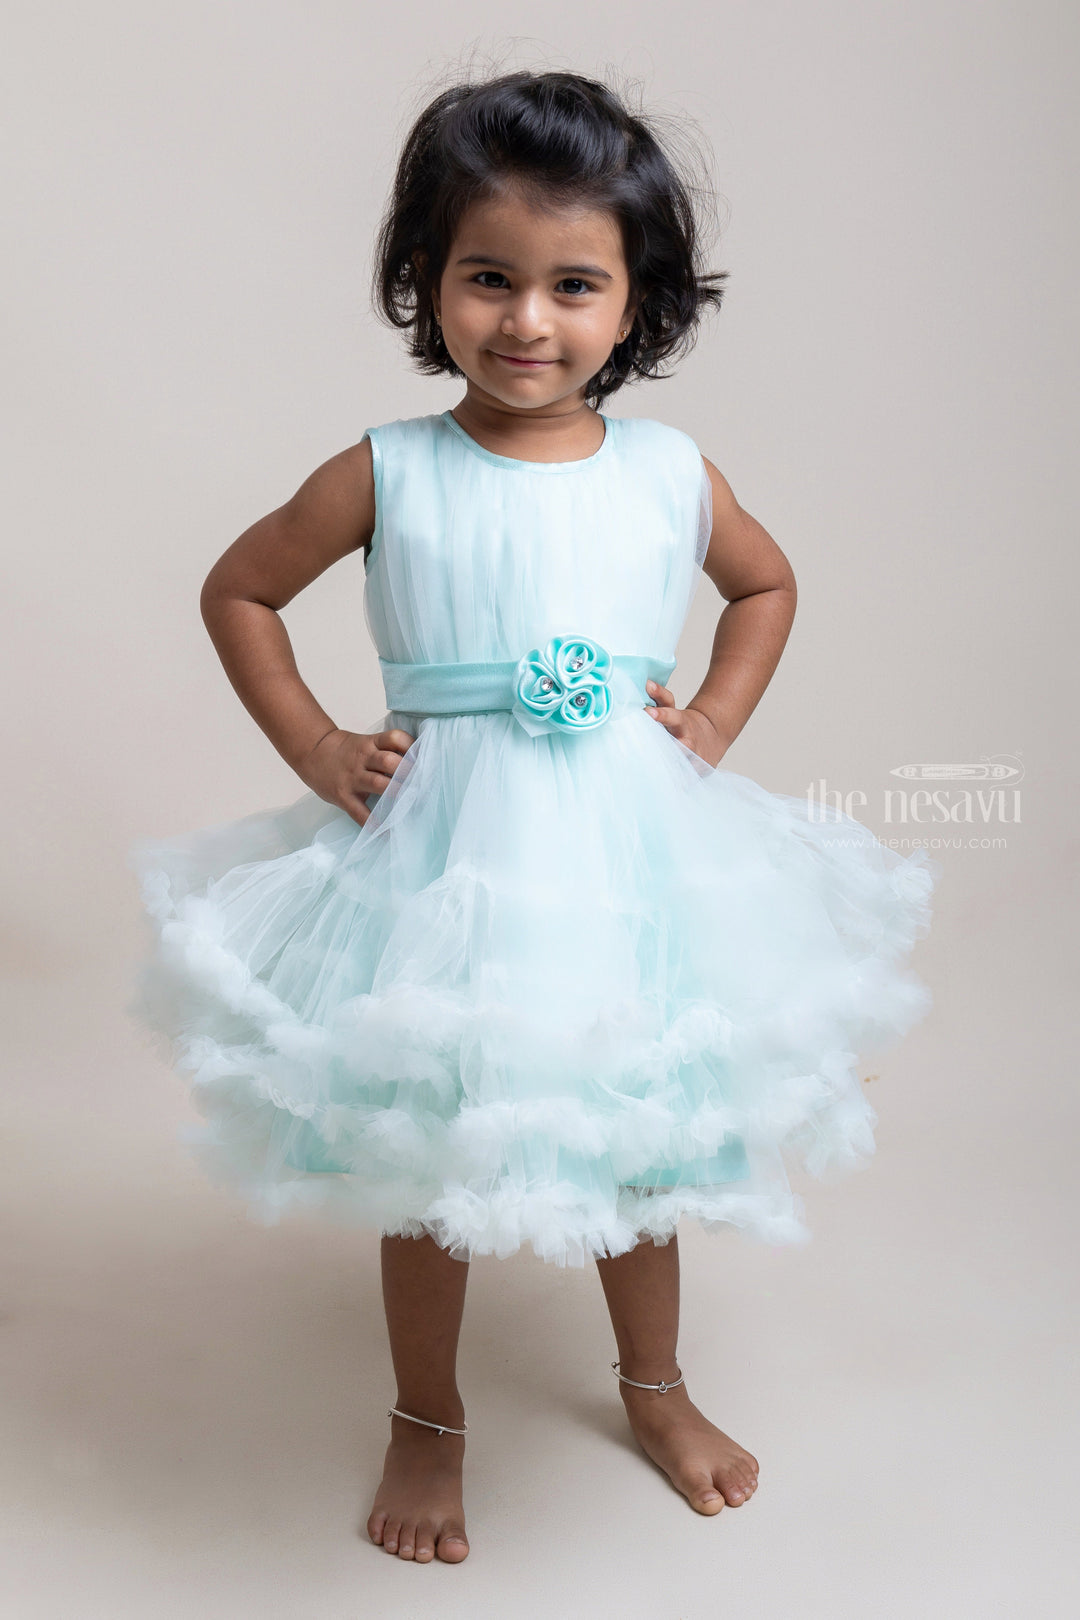 The Nesavu Girls Tutu Frock Pretty Sea Green Flower Crafted Puffed Party Frock For Girls Nesavu 16 (1Y) / Green PF114B Flower Designer Party Frock For Girls | Latest Girls Collection | The Nesavu